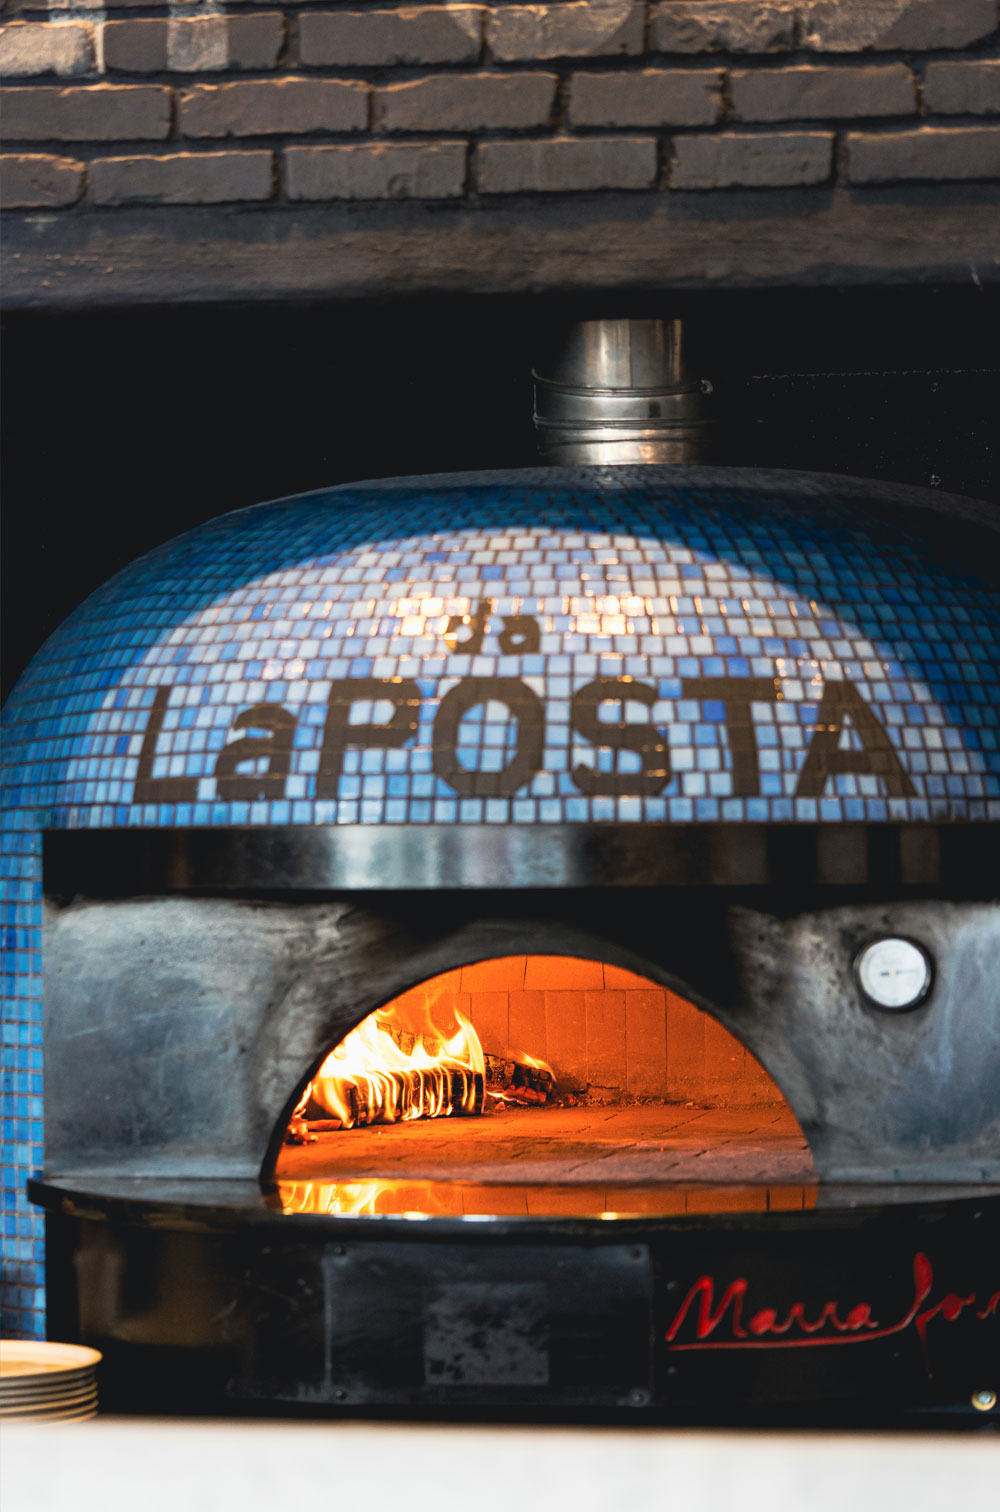 the hand-tiled wood-fired oven at da laposta, with laposta spelled out in mosaic